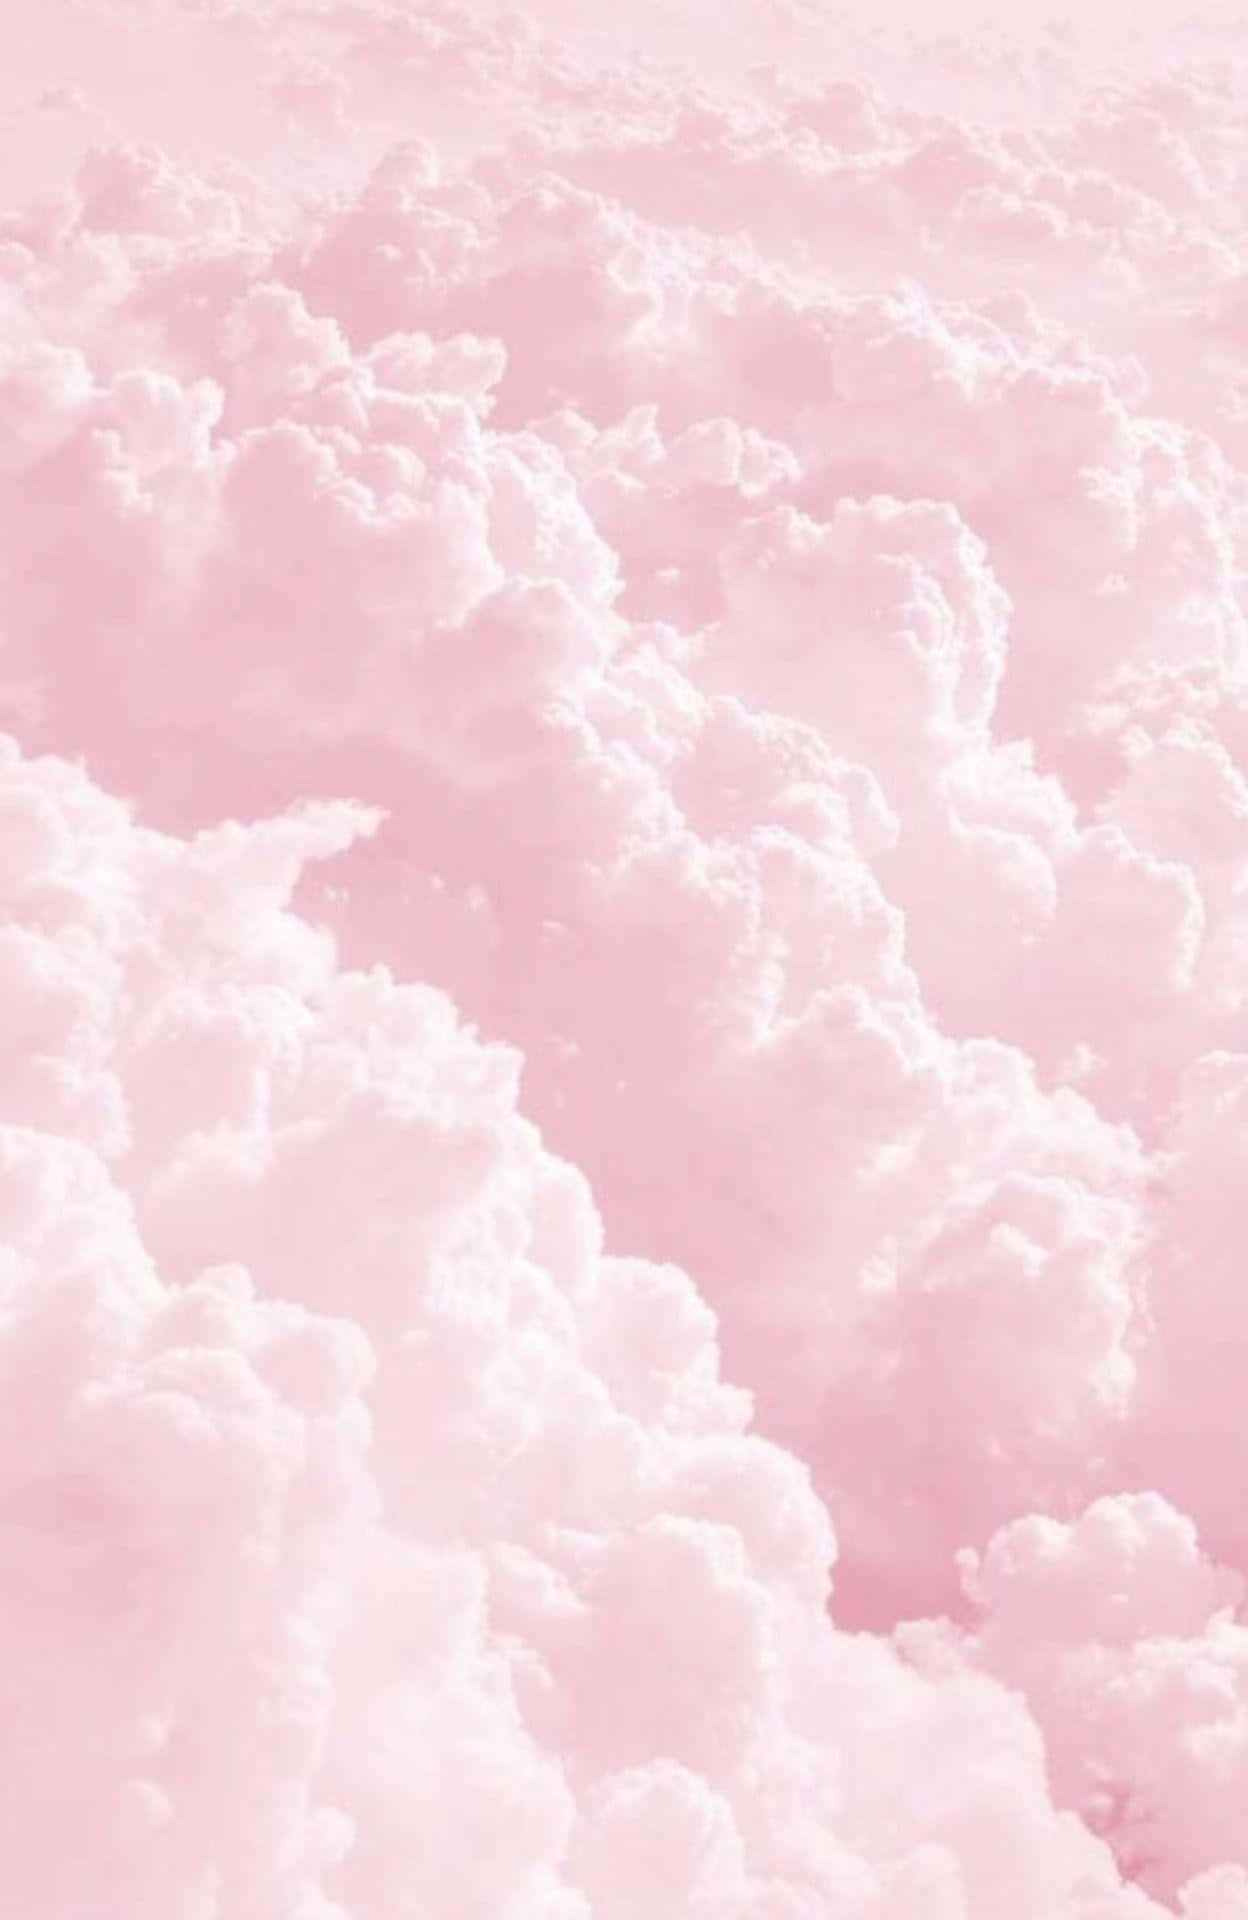 Pink Clouds In The Sky With A Pink Background Wallpaper